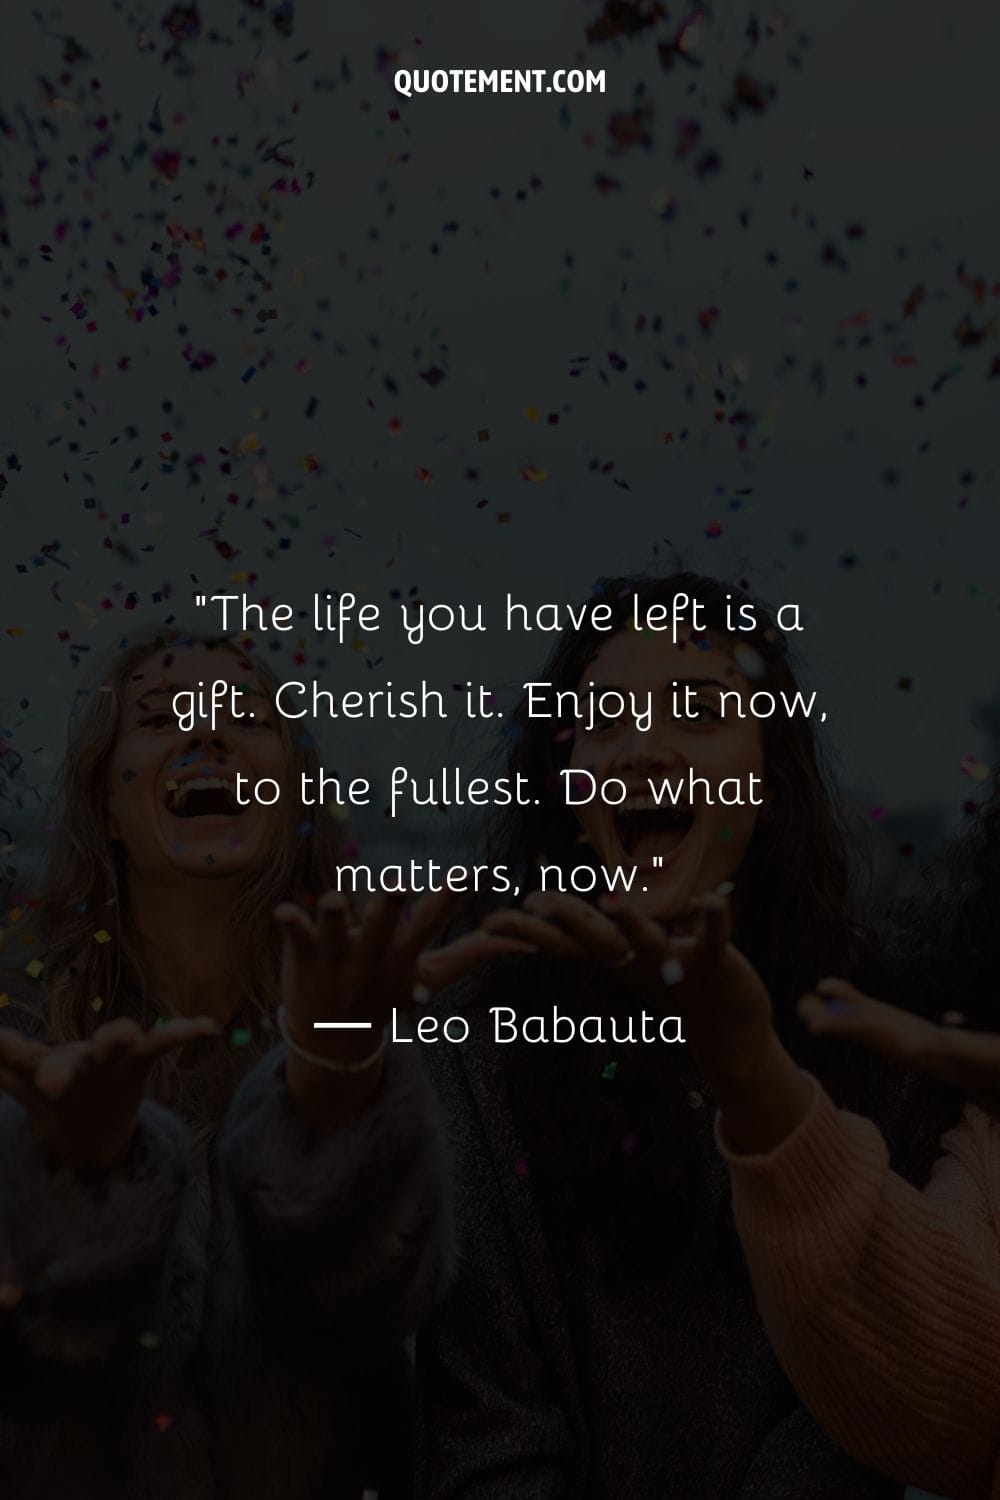 The life you have left is a gift. Cherish it. Enjoy it now, to the fullest. Do what matters, now.